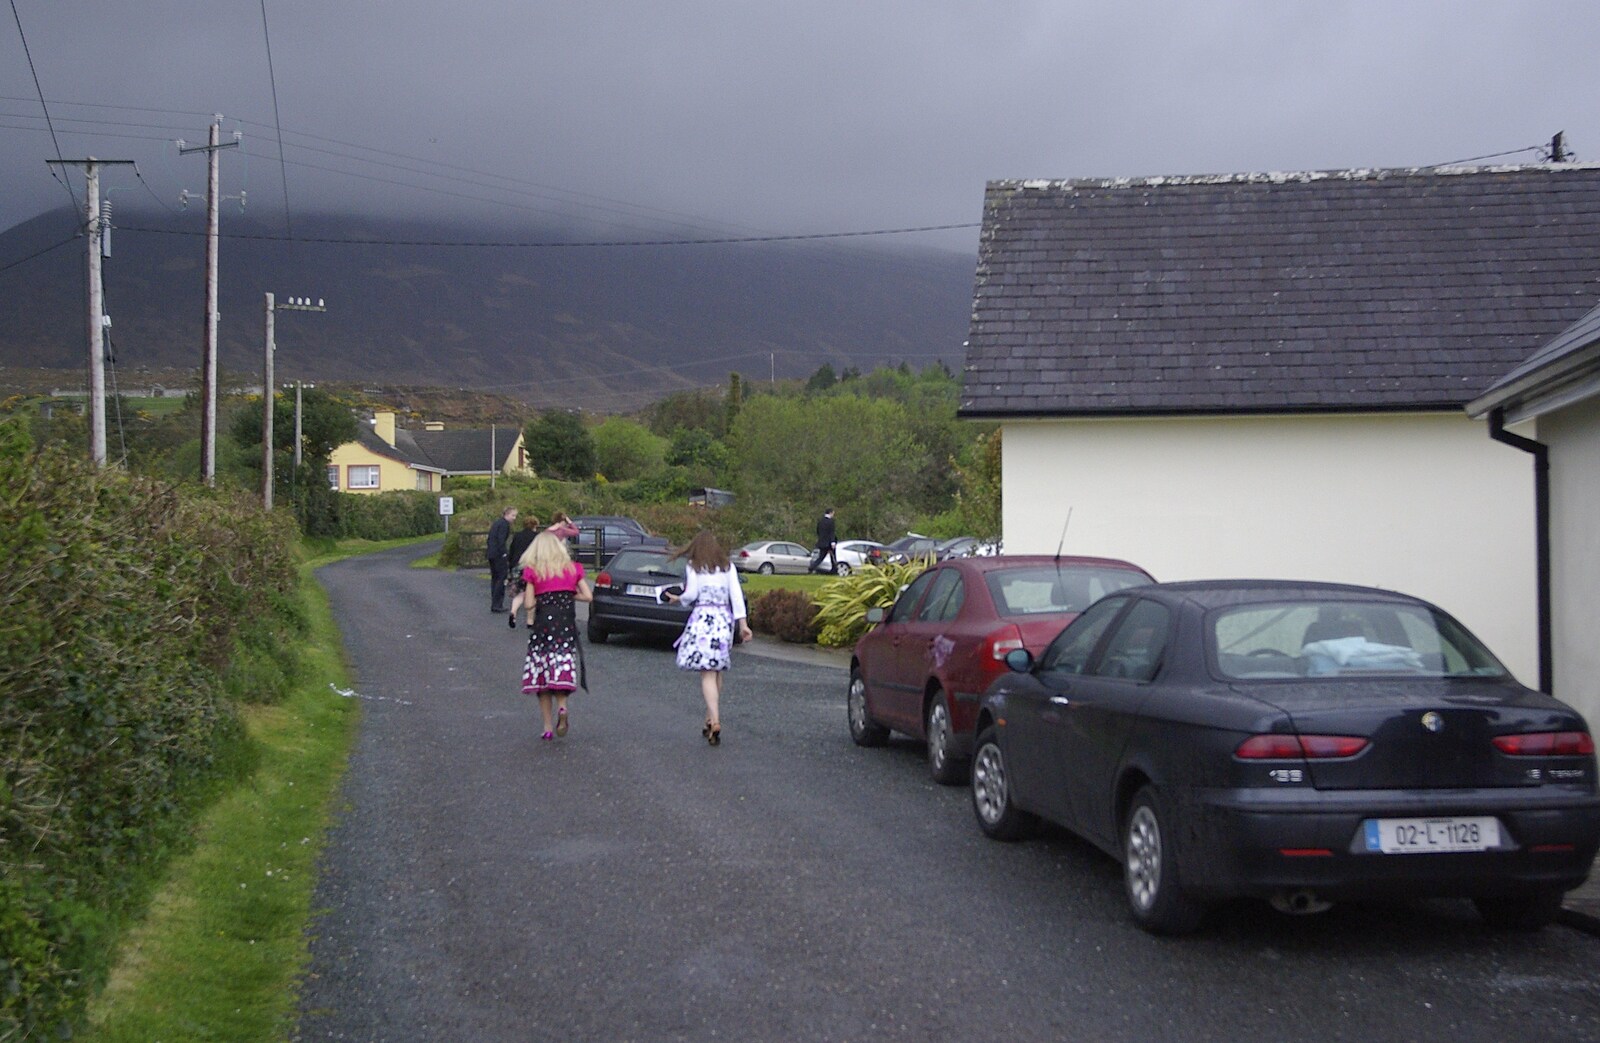 Paul and Jenny's Wedding, Tralee, County Kerry, Ireland - 3rd May 2008: Walking up the road